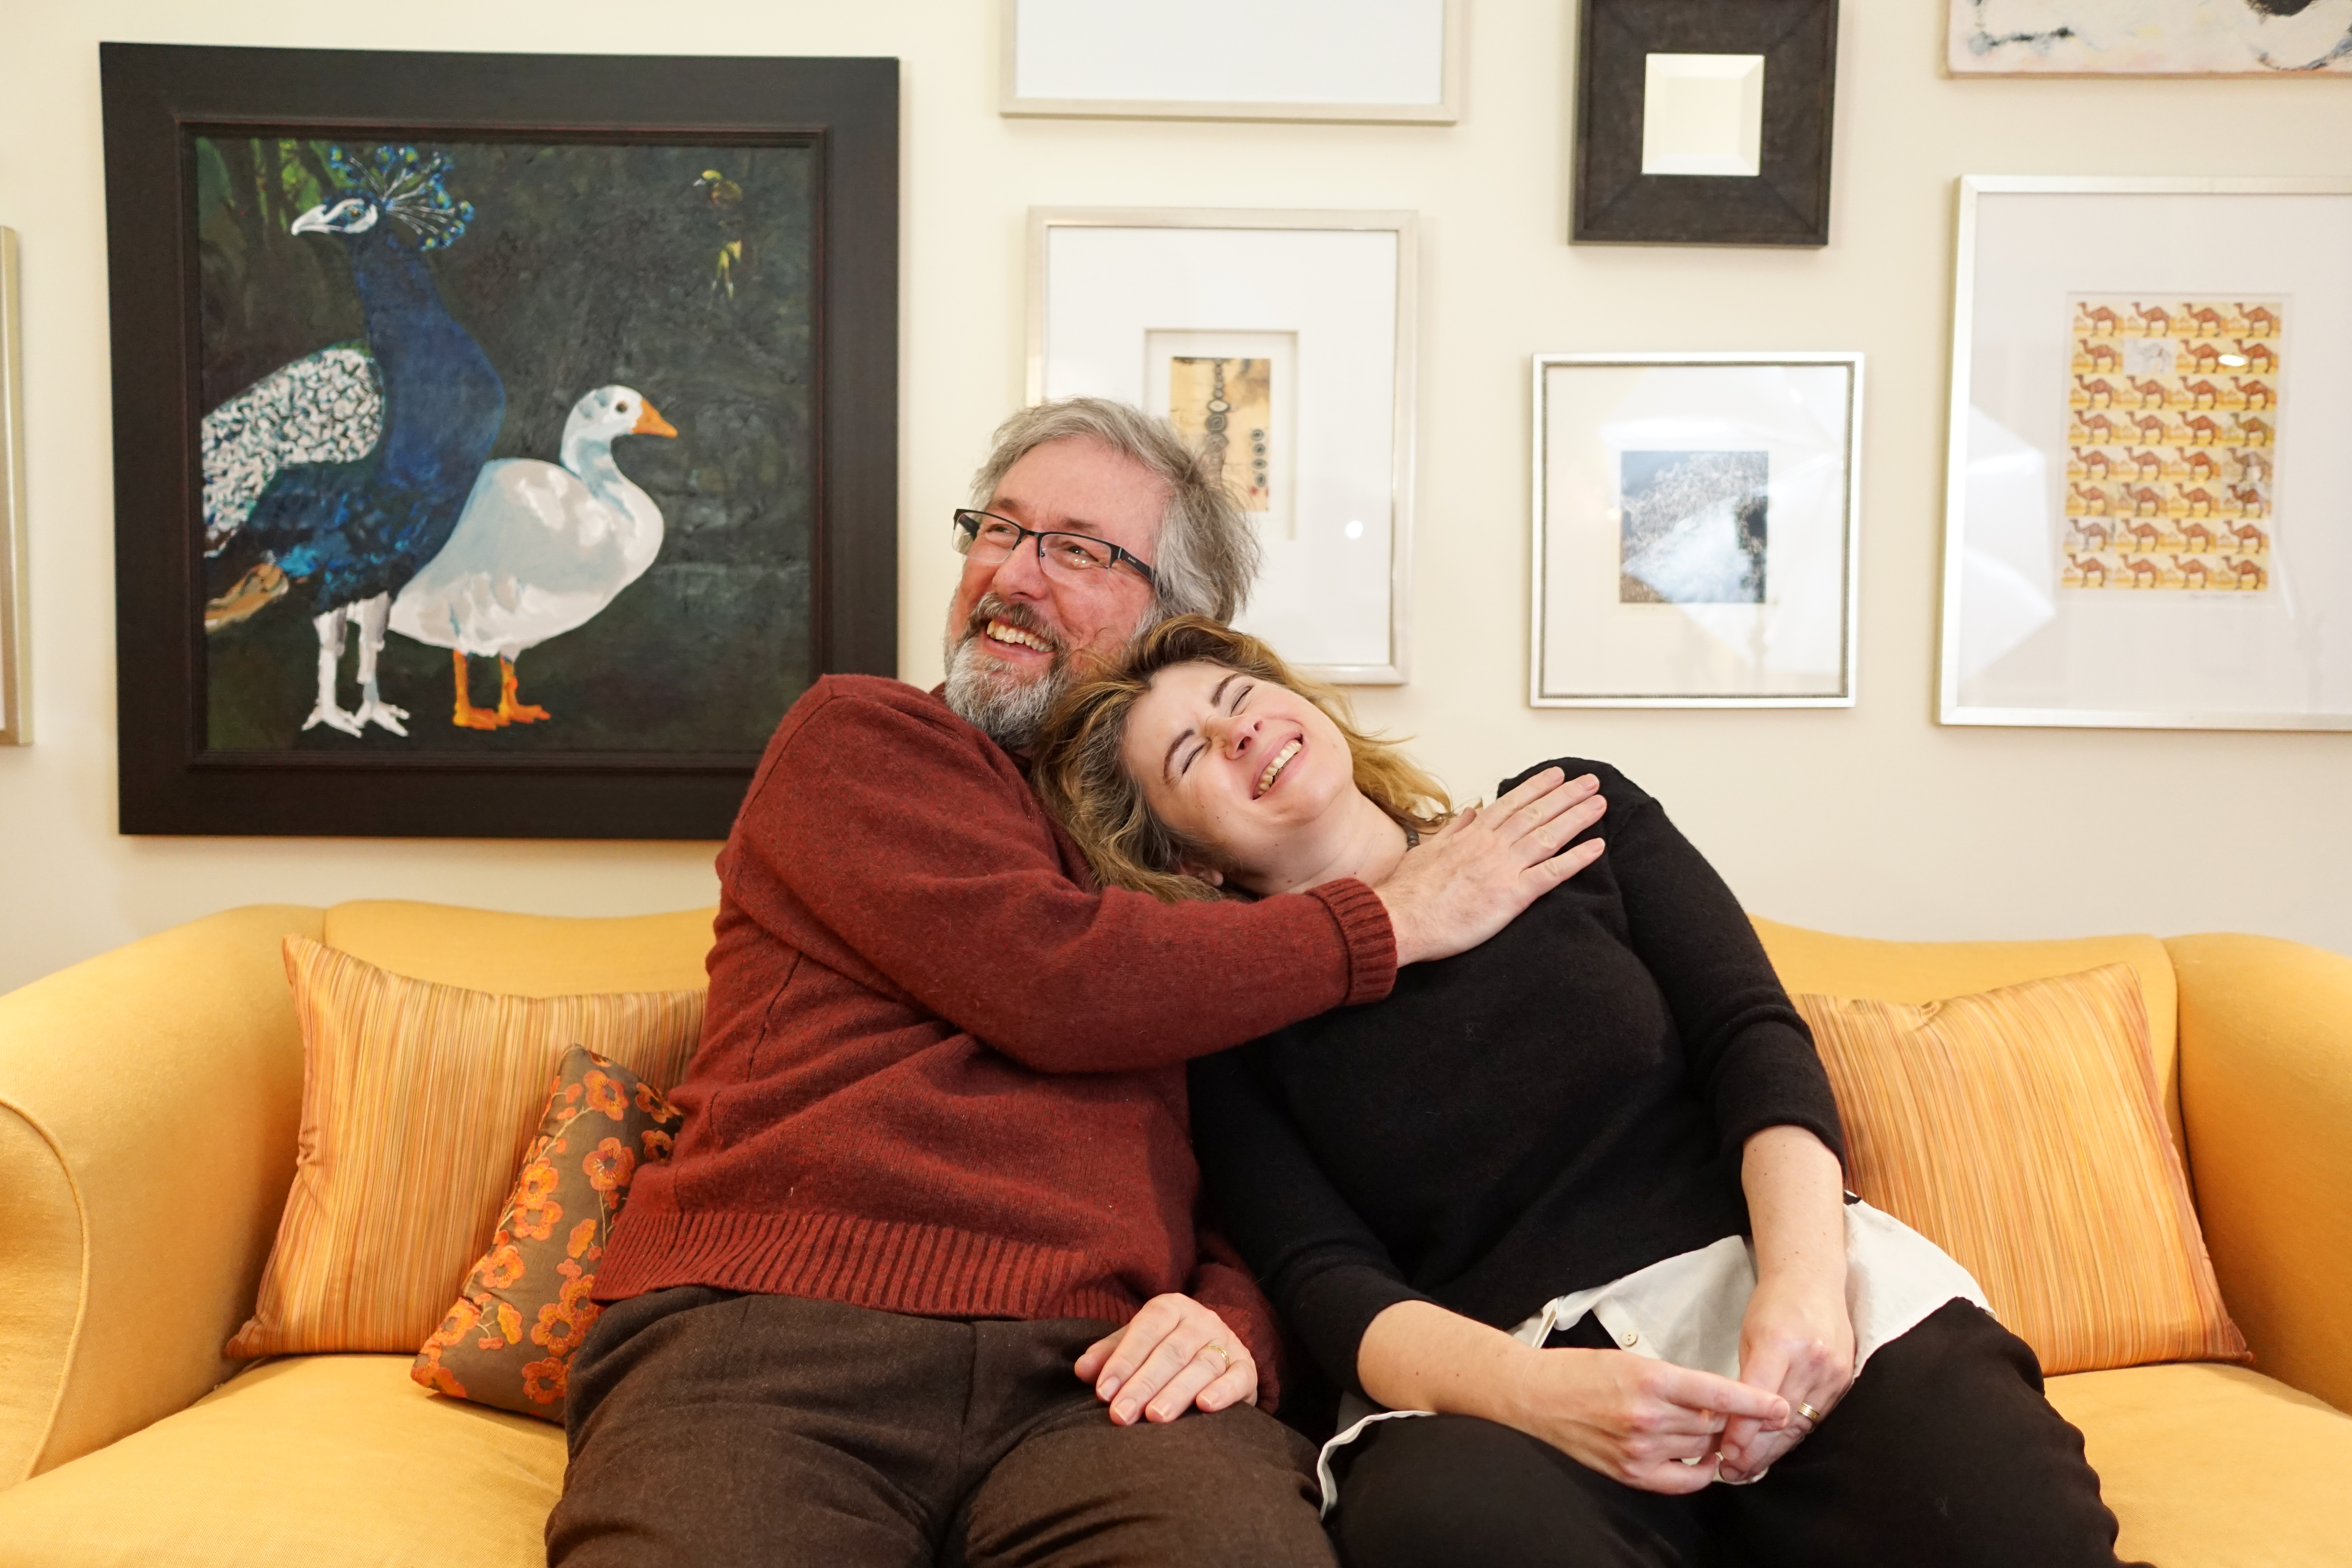 Two middle-aged people hugging and smiling on a yellow couch